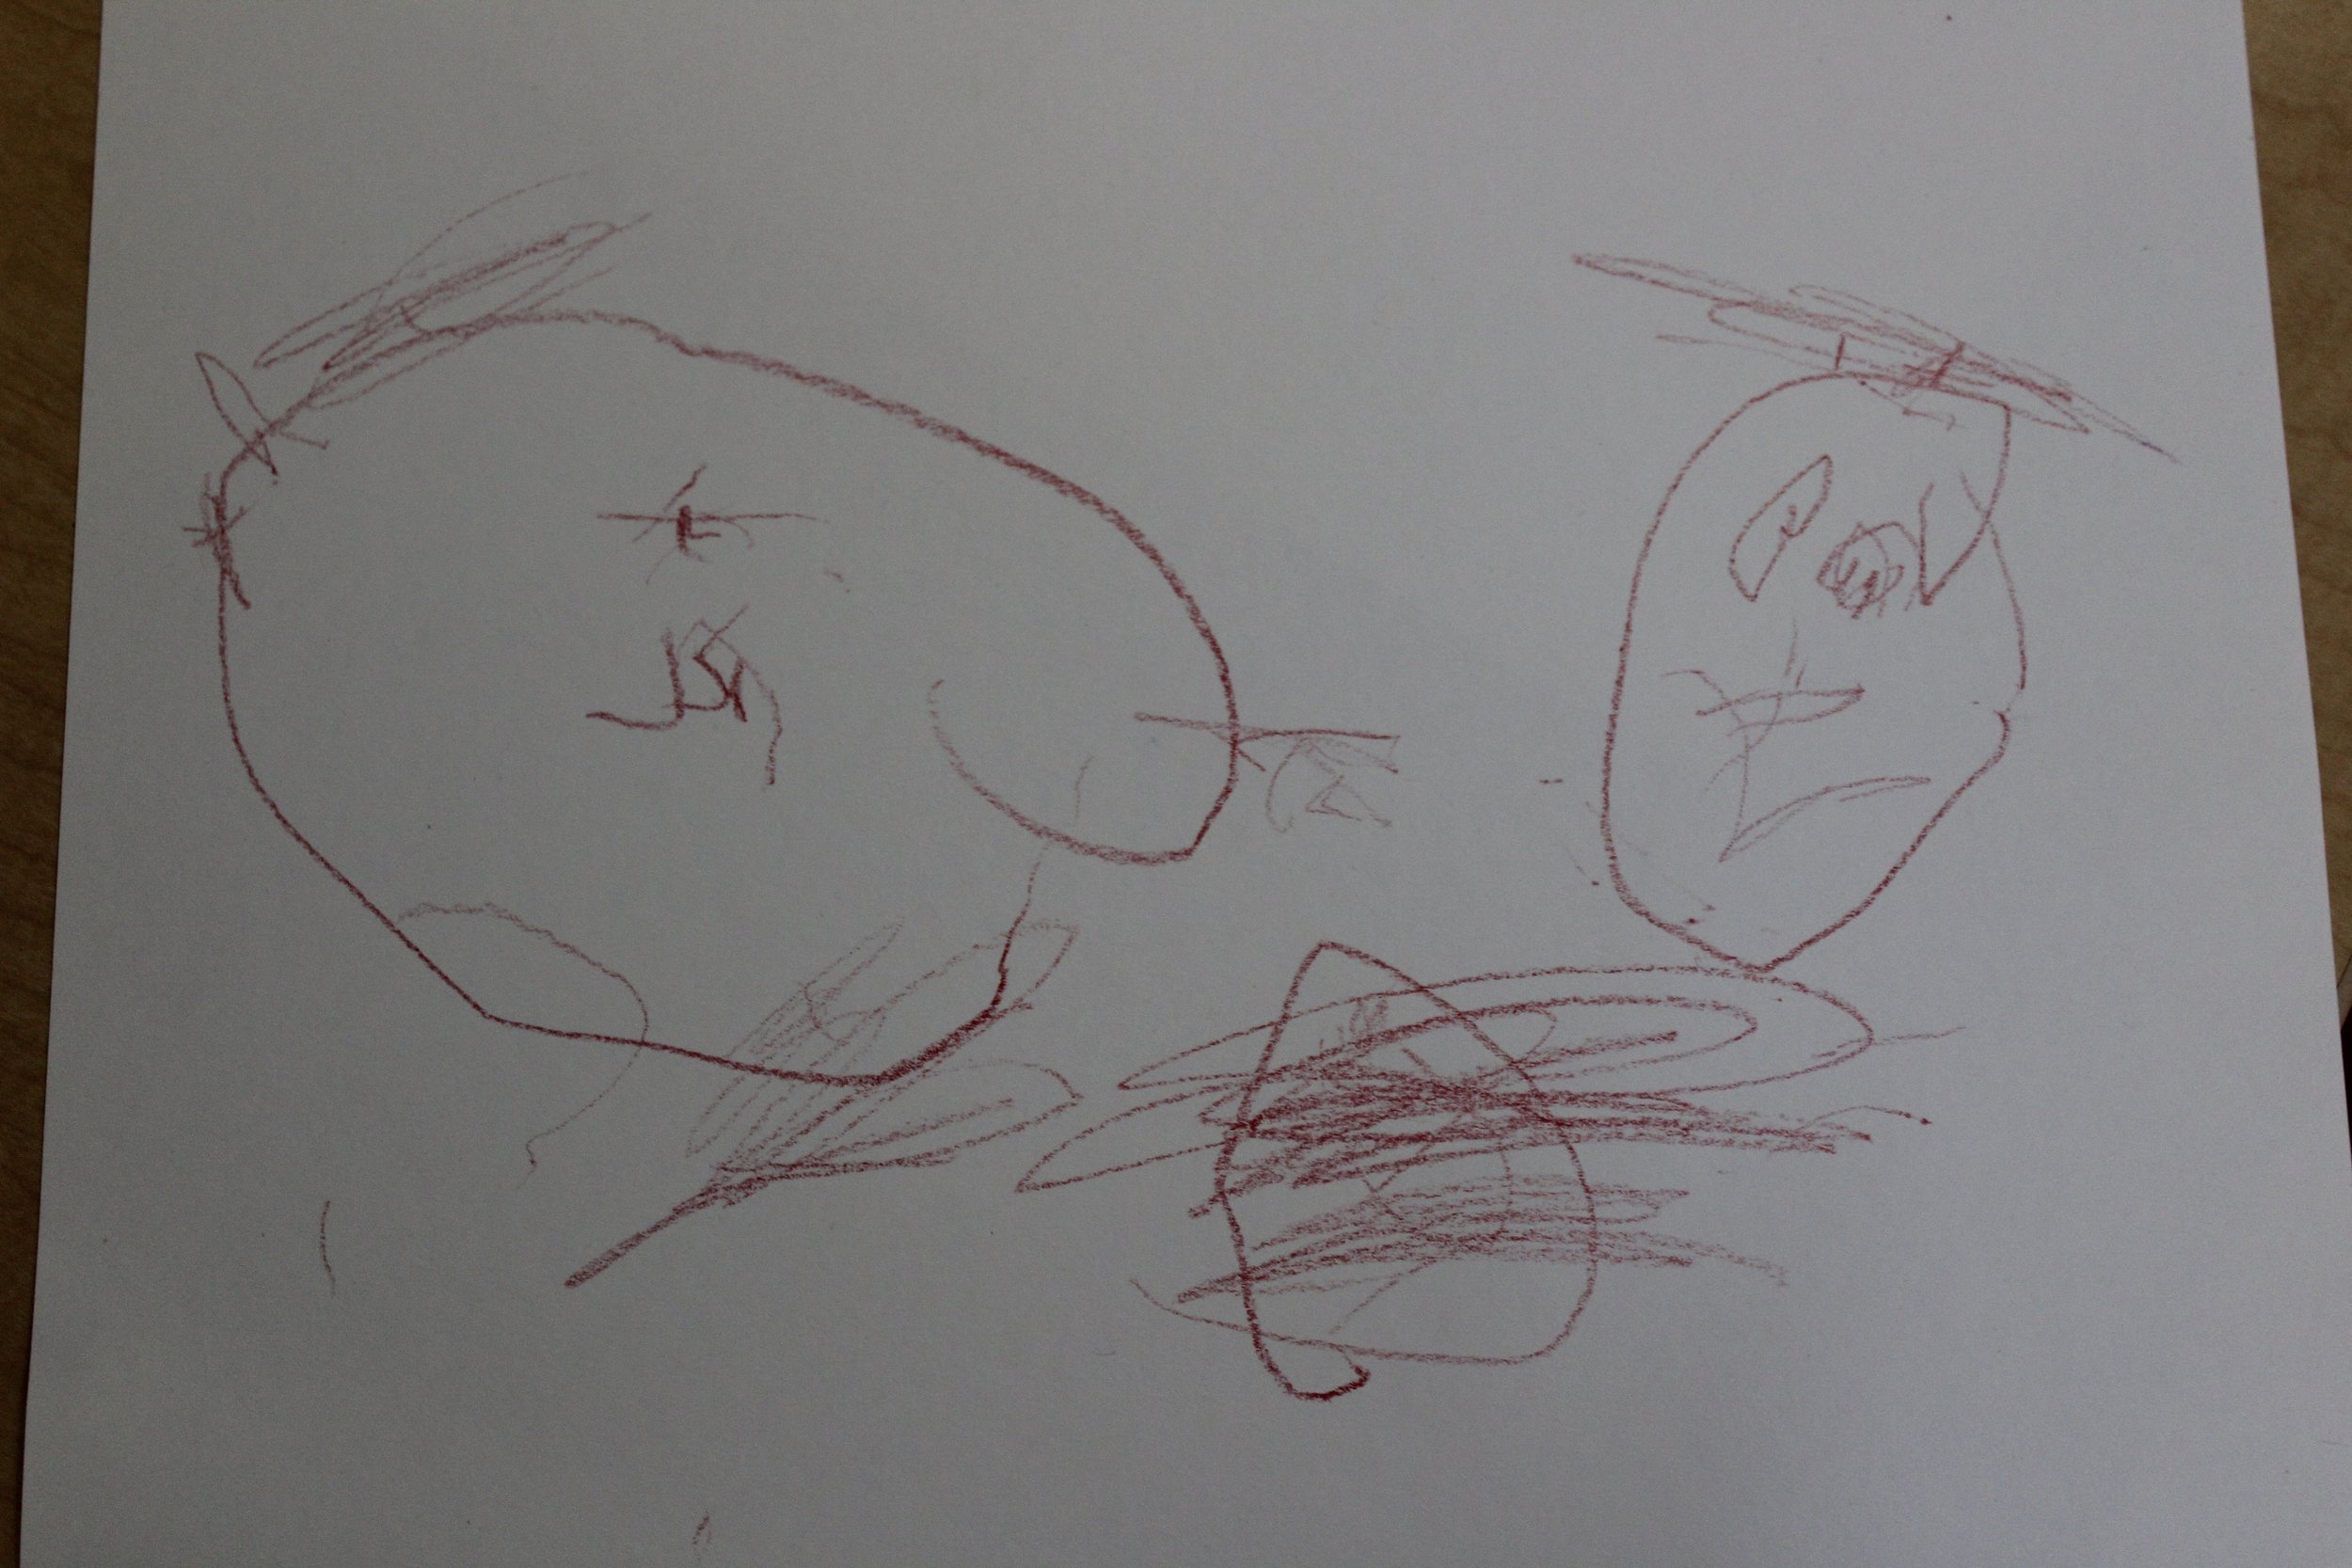  Harlow drew her teachers, Janet on the left and Sandra on the right. Harlow asked Janet what Sandra needs (referring to the different facial features). When Janet told her that Sandra needs ears and hair, she drew them exactly where they suppose to 